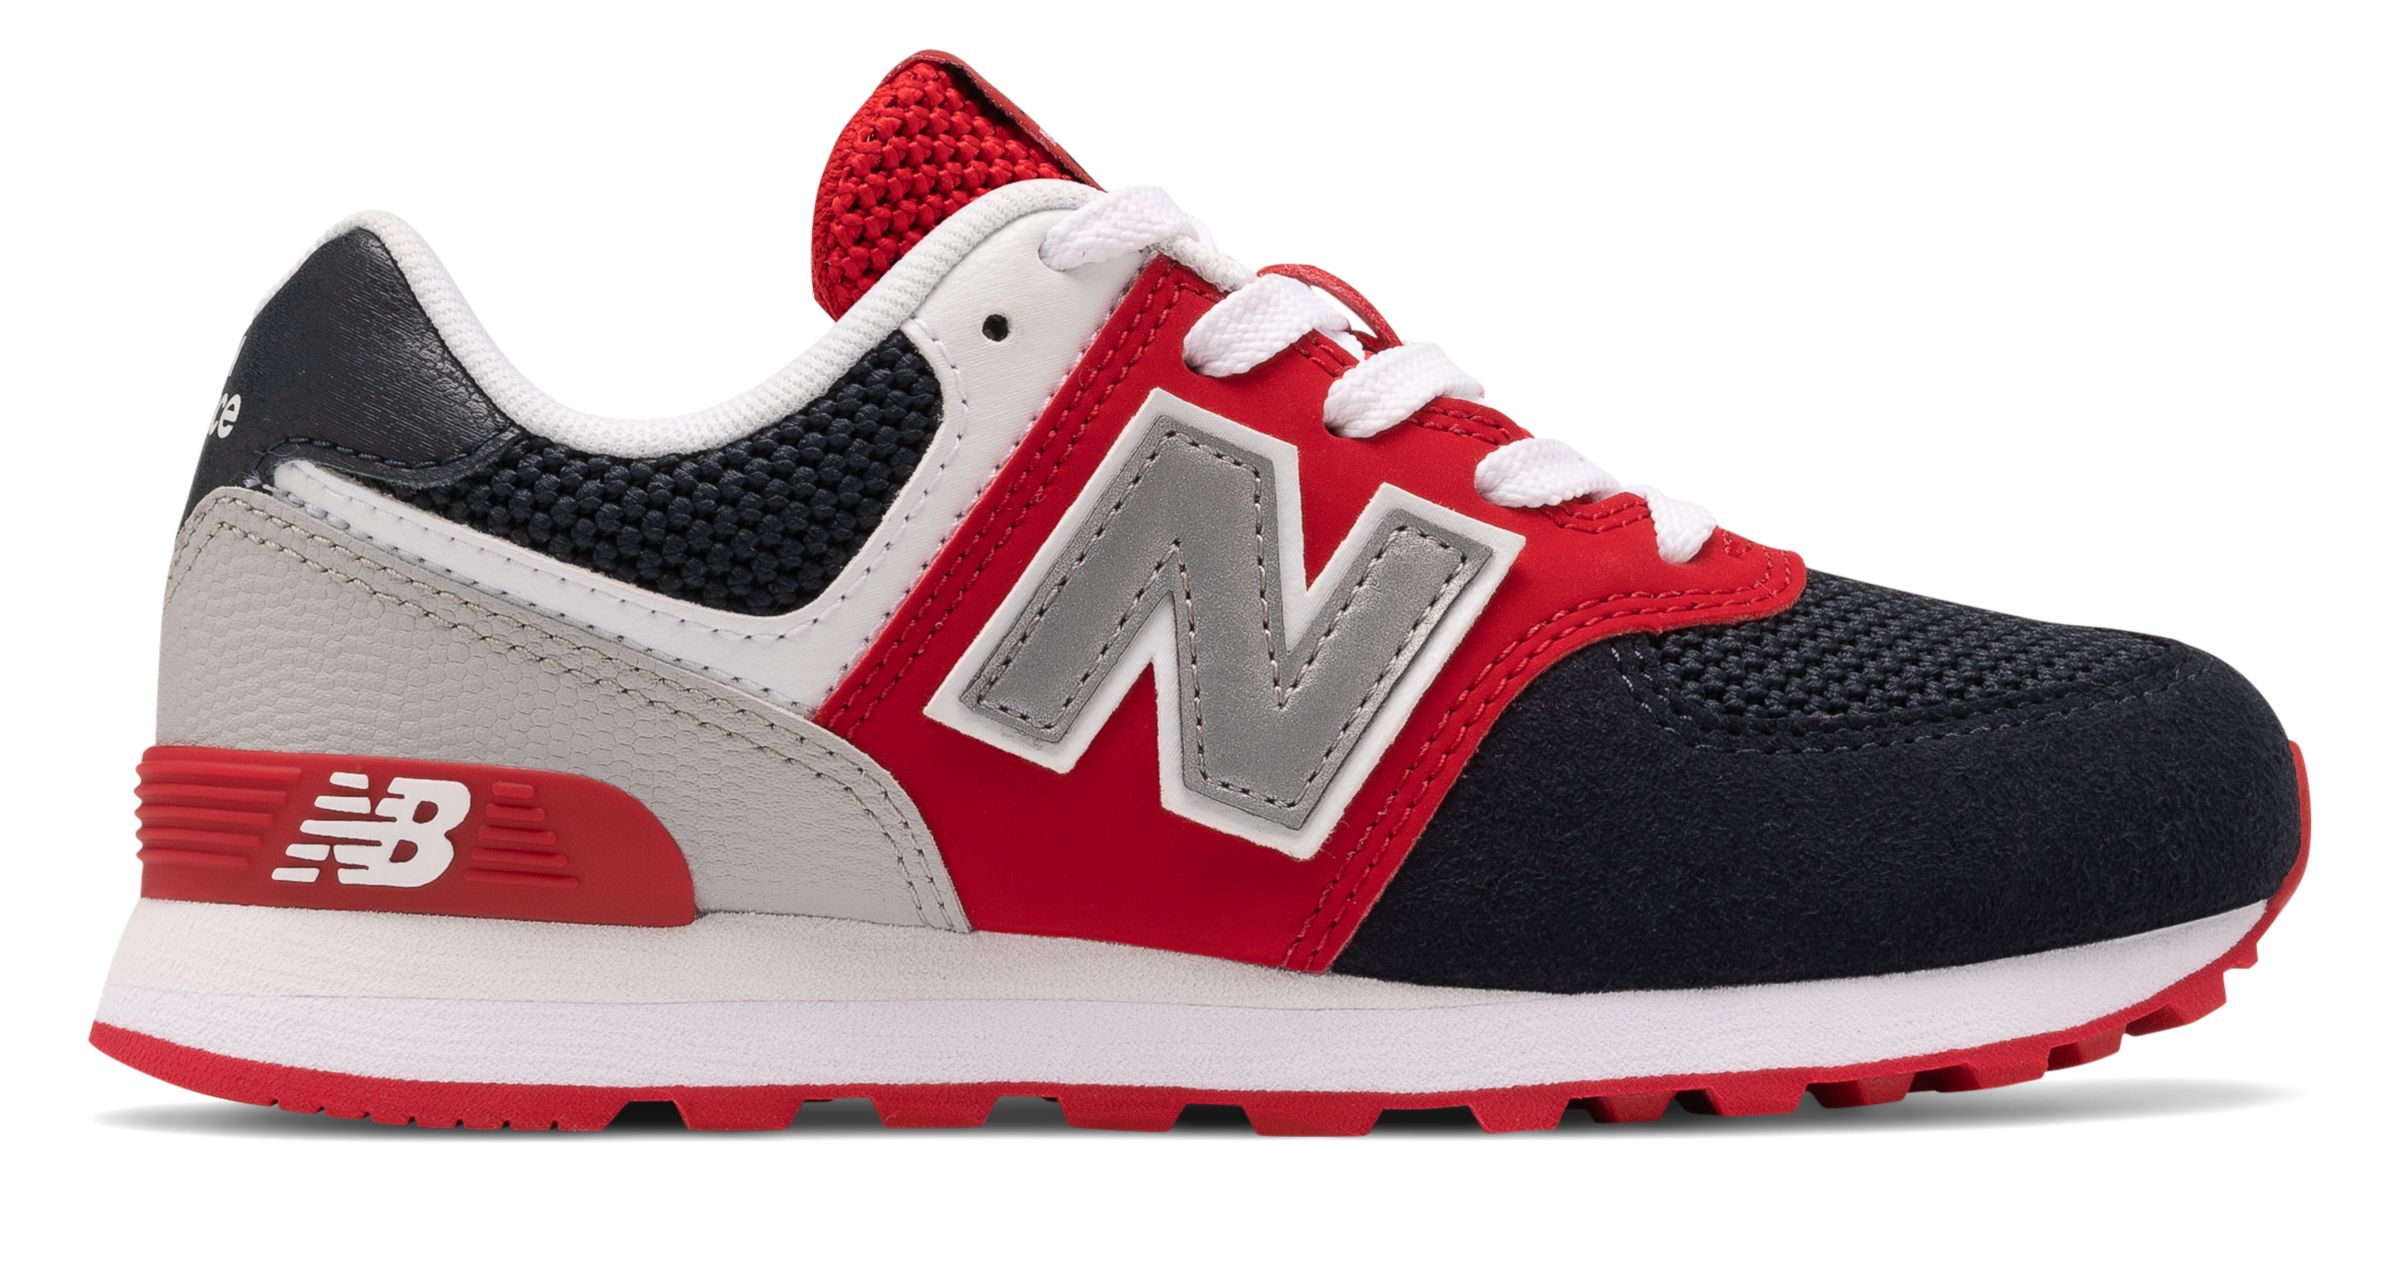 547 Search Results - New Balance